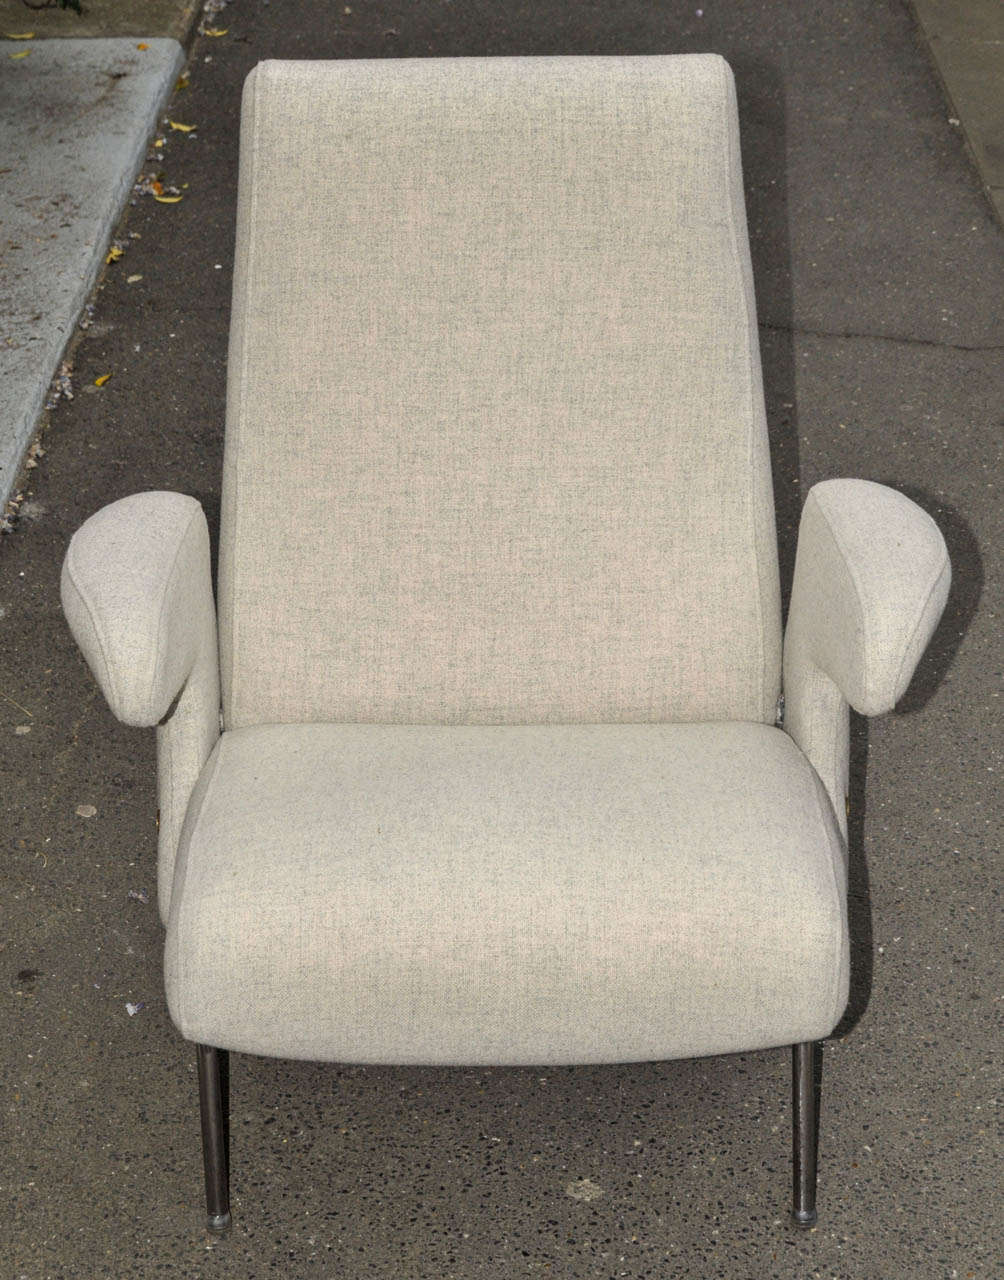 Pair of 1954 armchairs by Eugenio Carboni. Artiflex Edition. 'Delphino' model. New fabric. Good condition. Normal wear consistent with age and use.